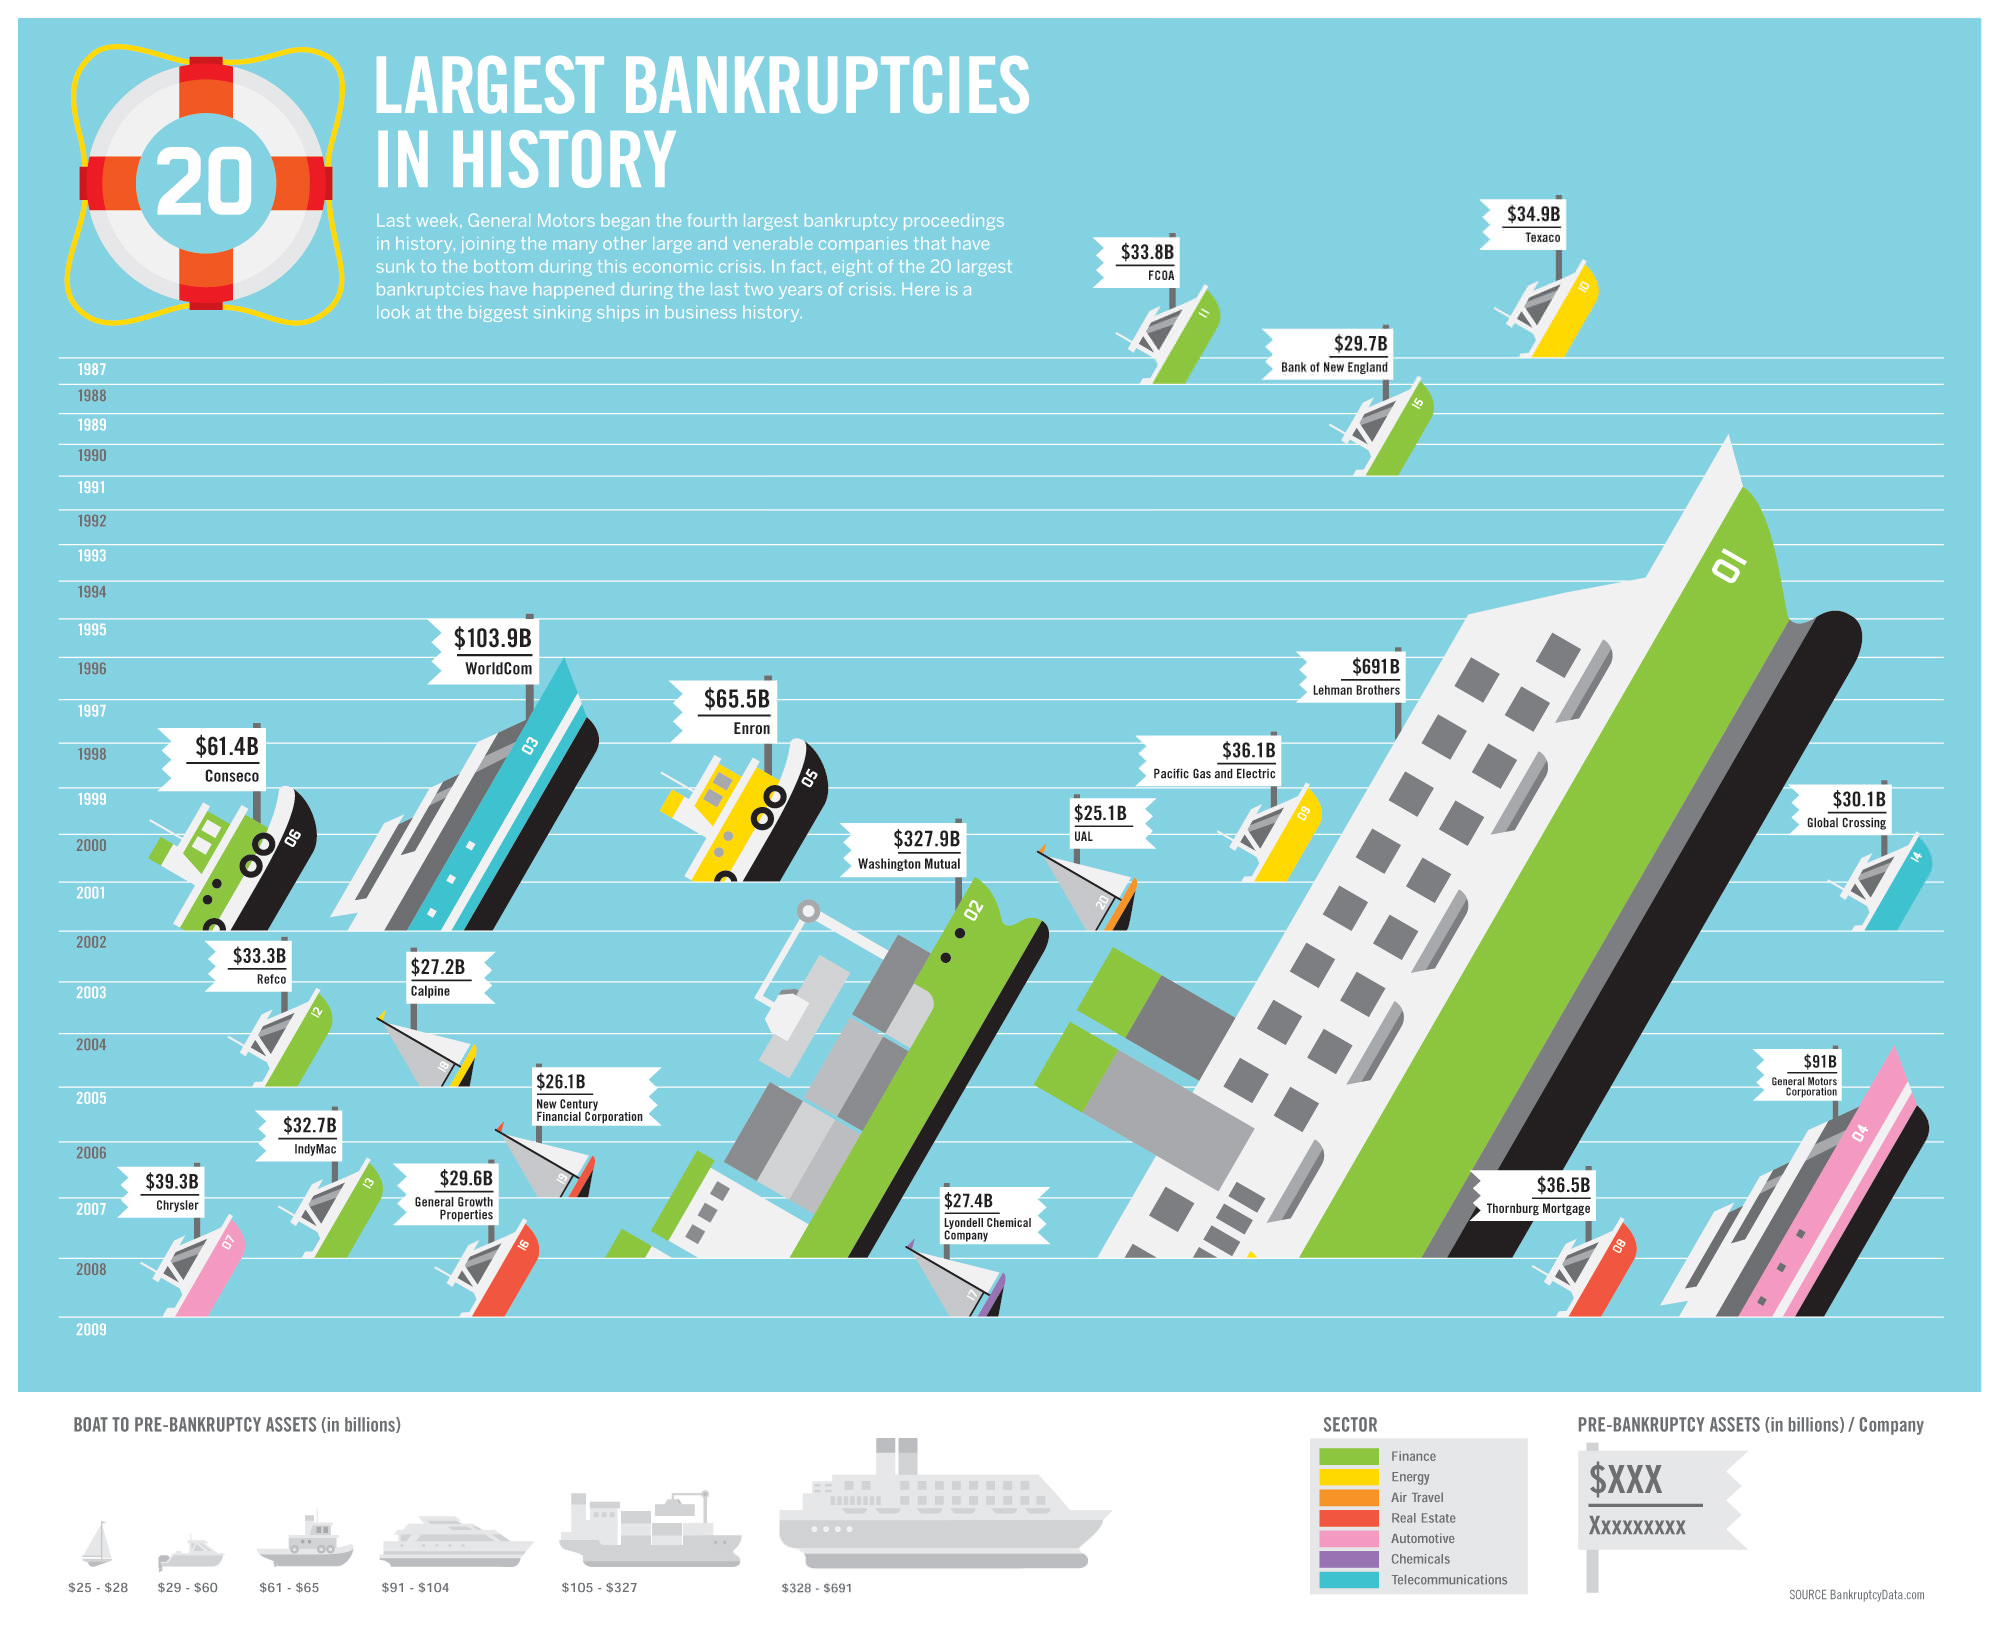 Measuring History's Largest Bankruptcies with Boats (Infographic)